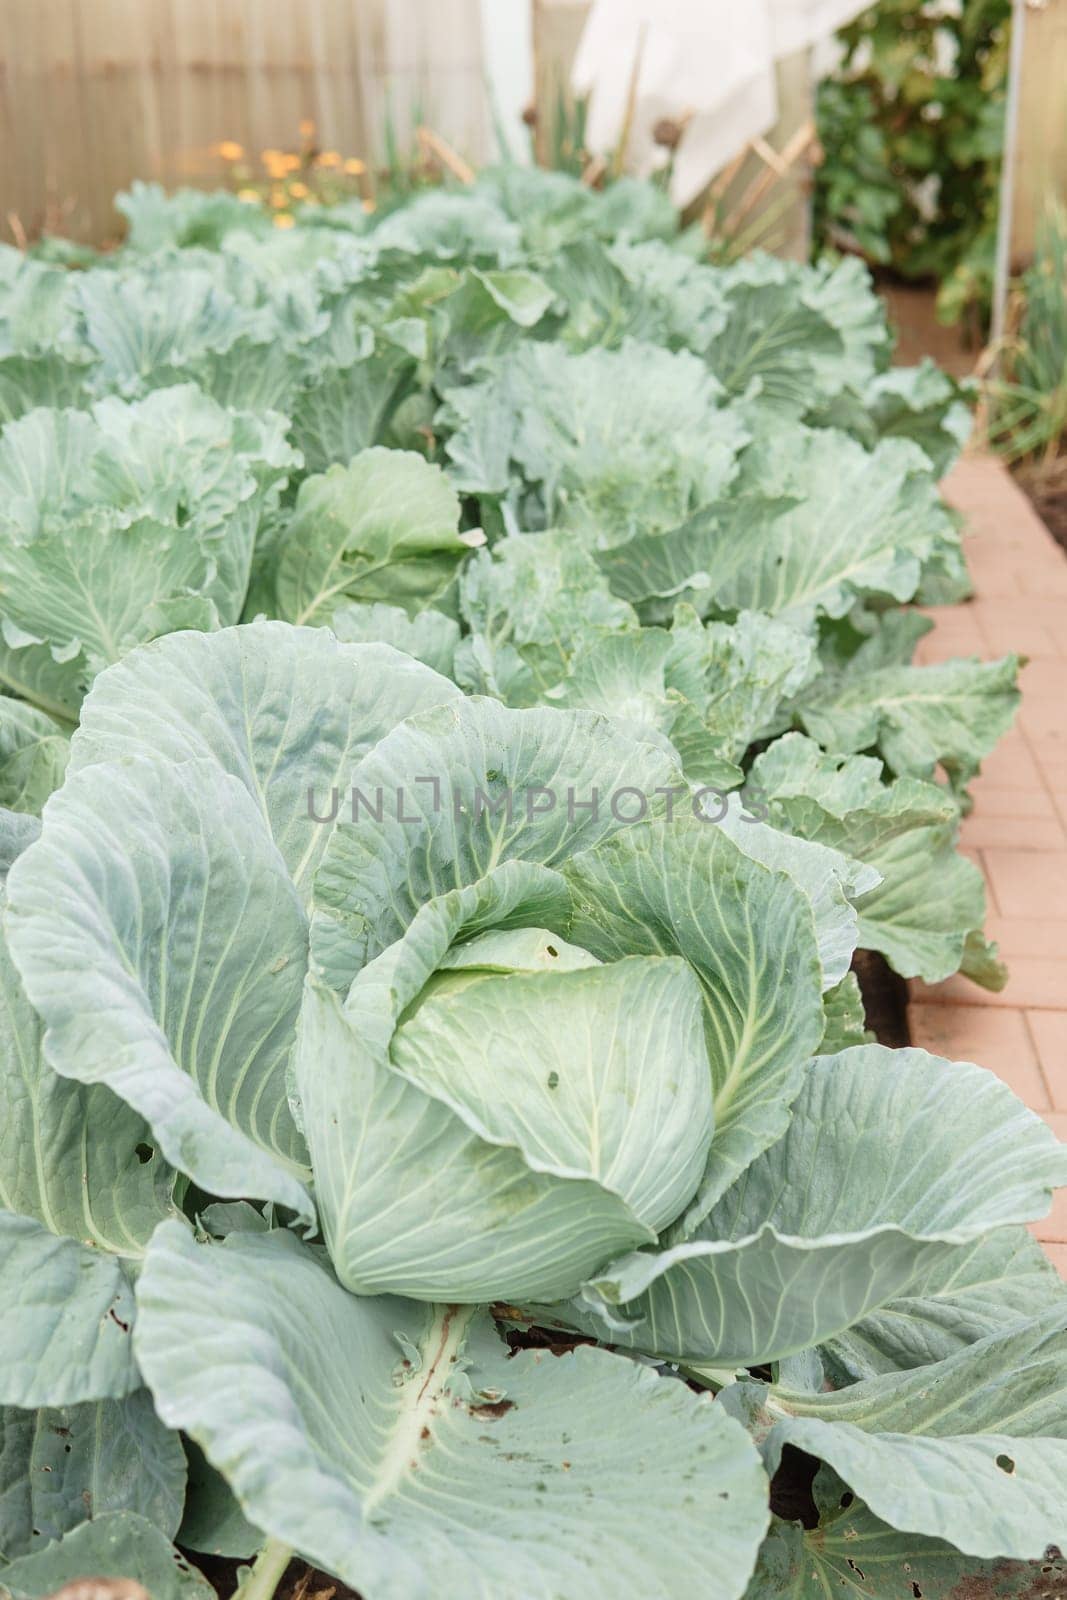 Cabbage grows in the garden. Harvesting cabbage. Life in the village. by Annu1tochka